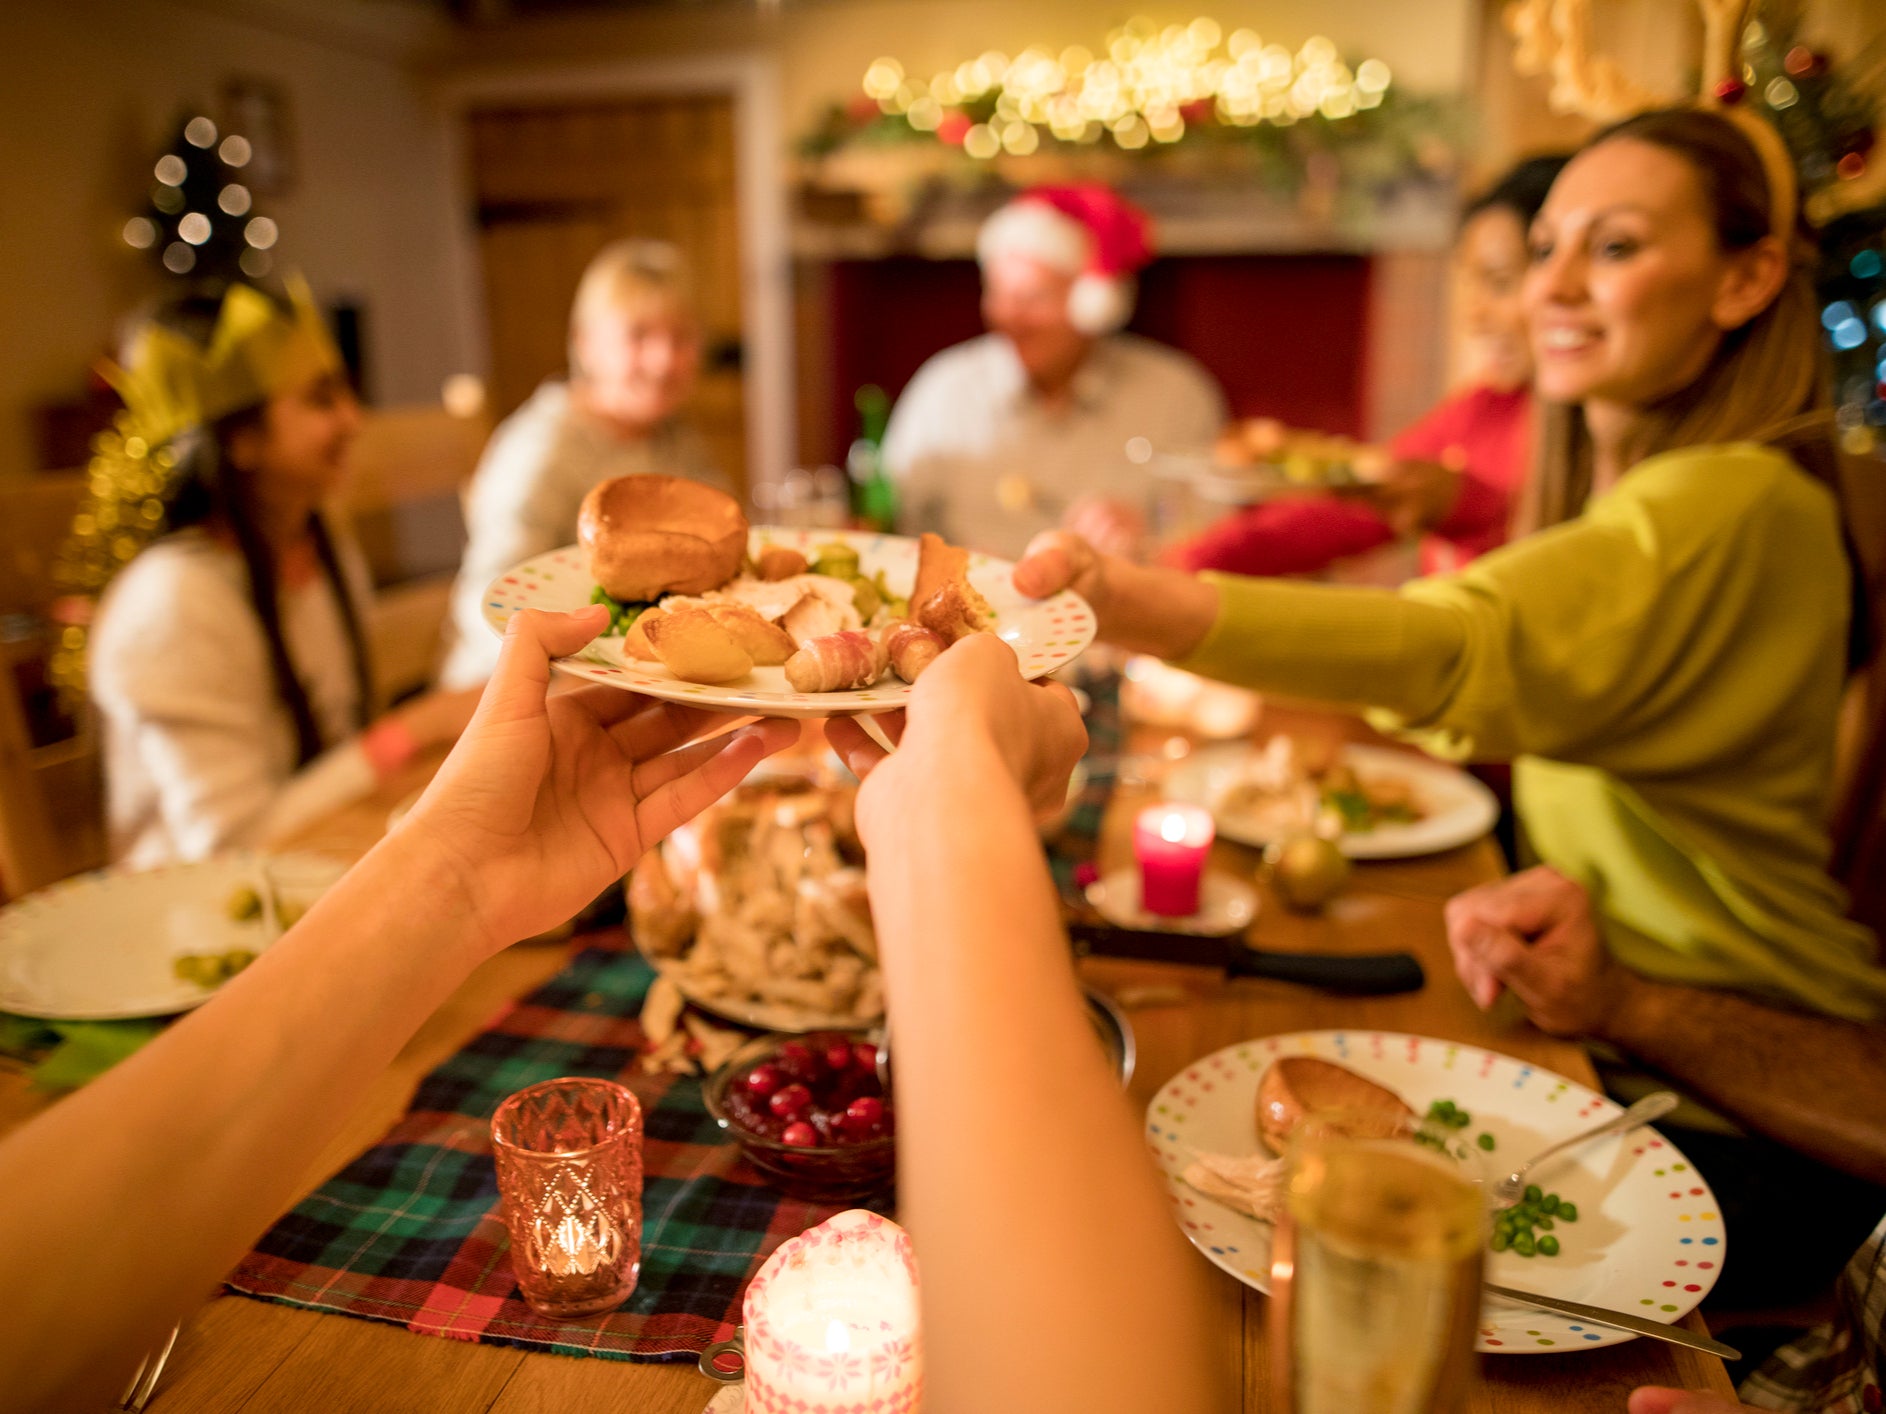 Nearly seven out of every 10 people are worried about being able to afford Christmas dinner this year